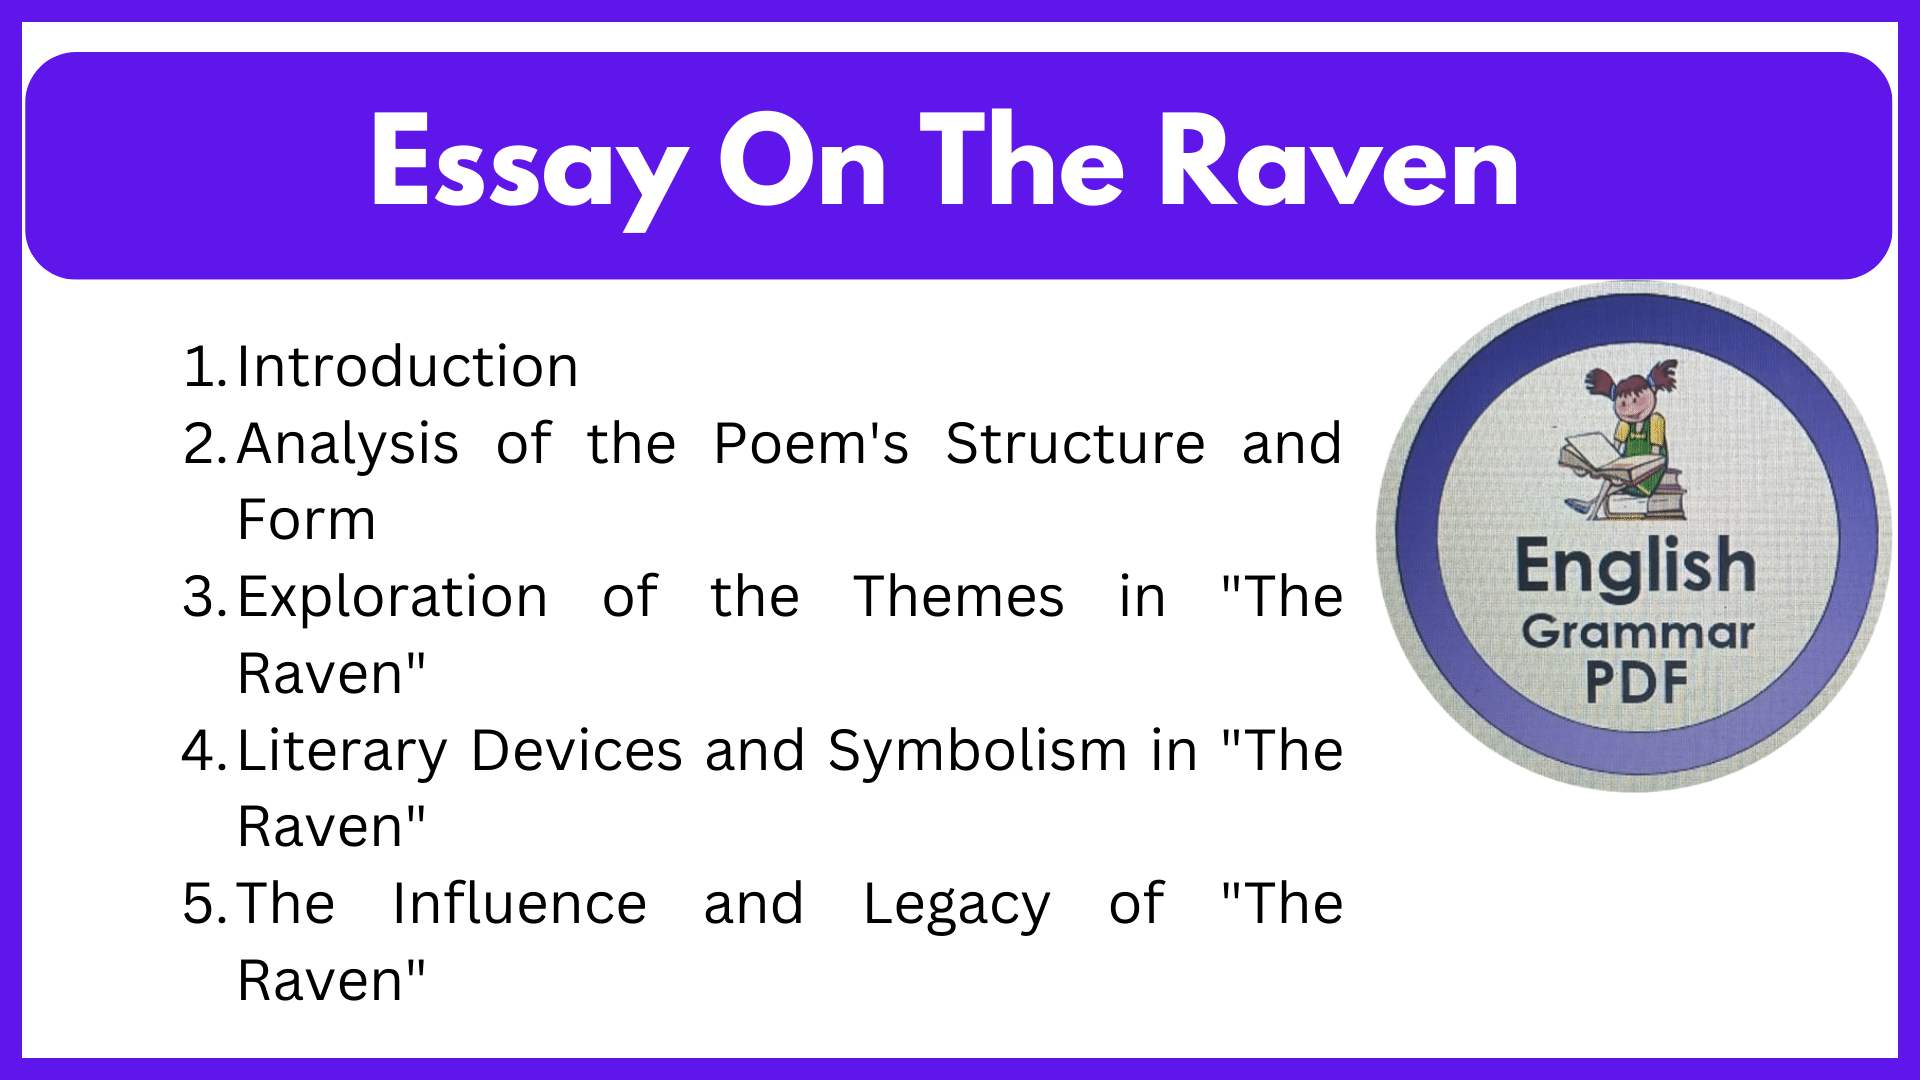 Essay On The Raven